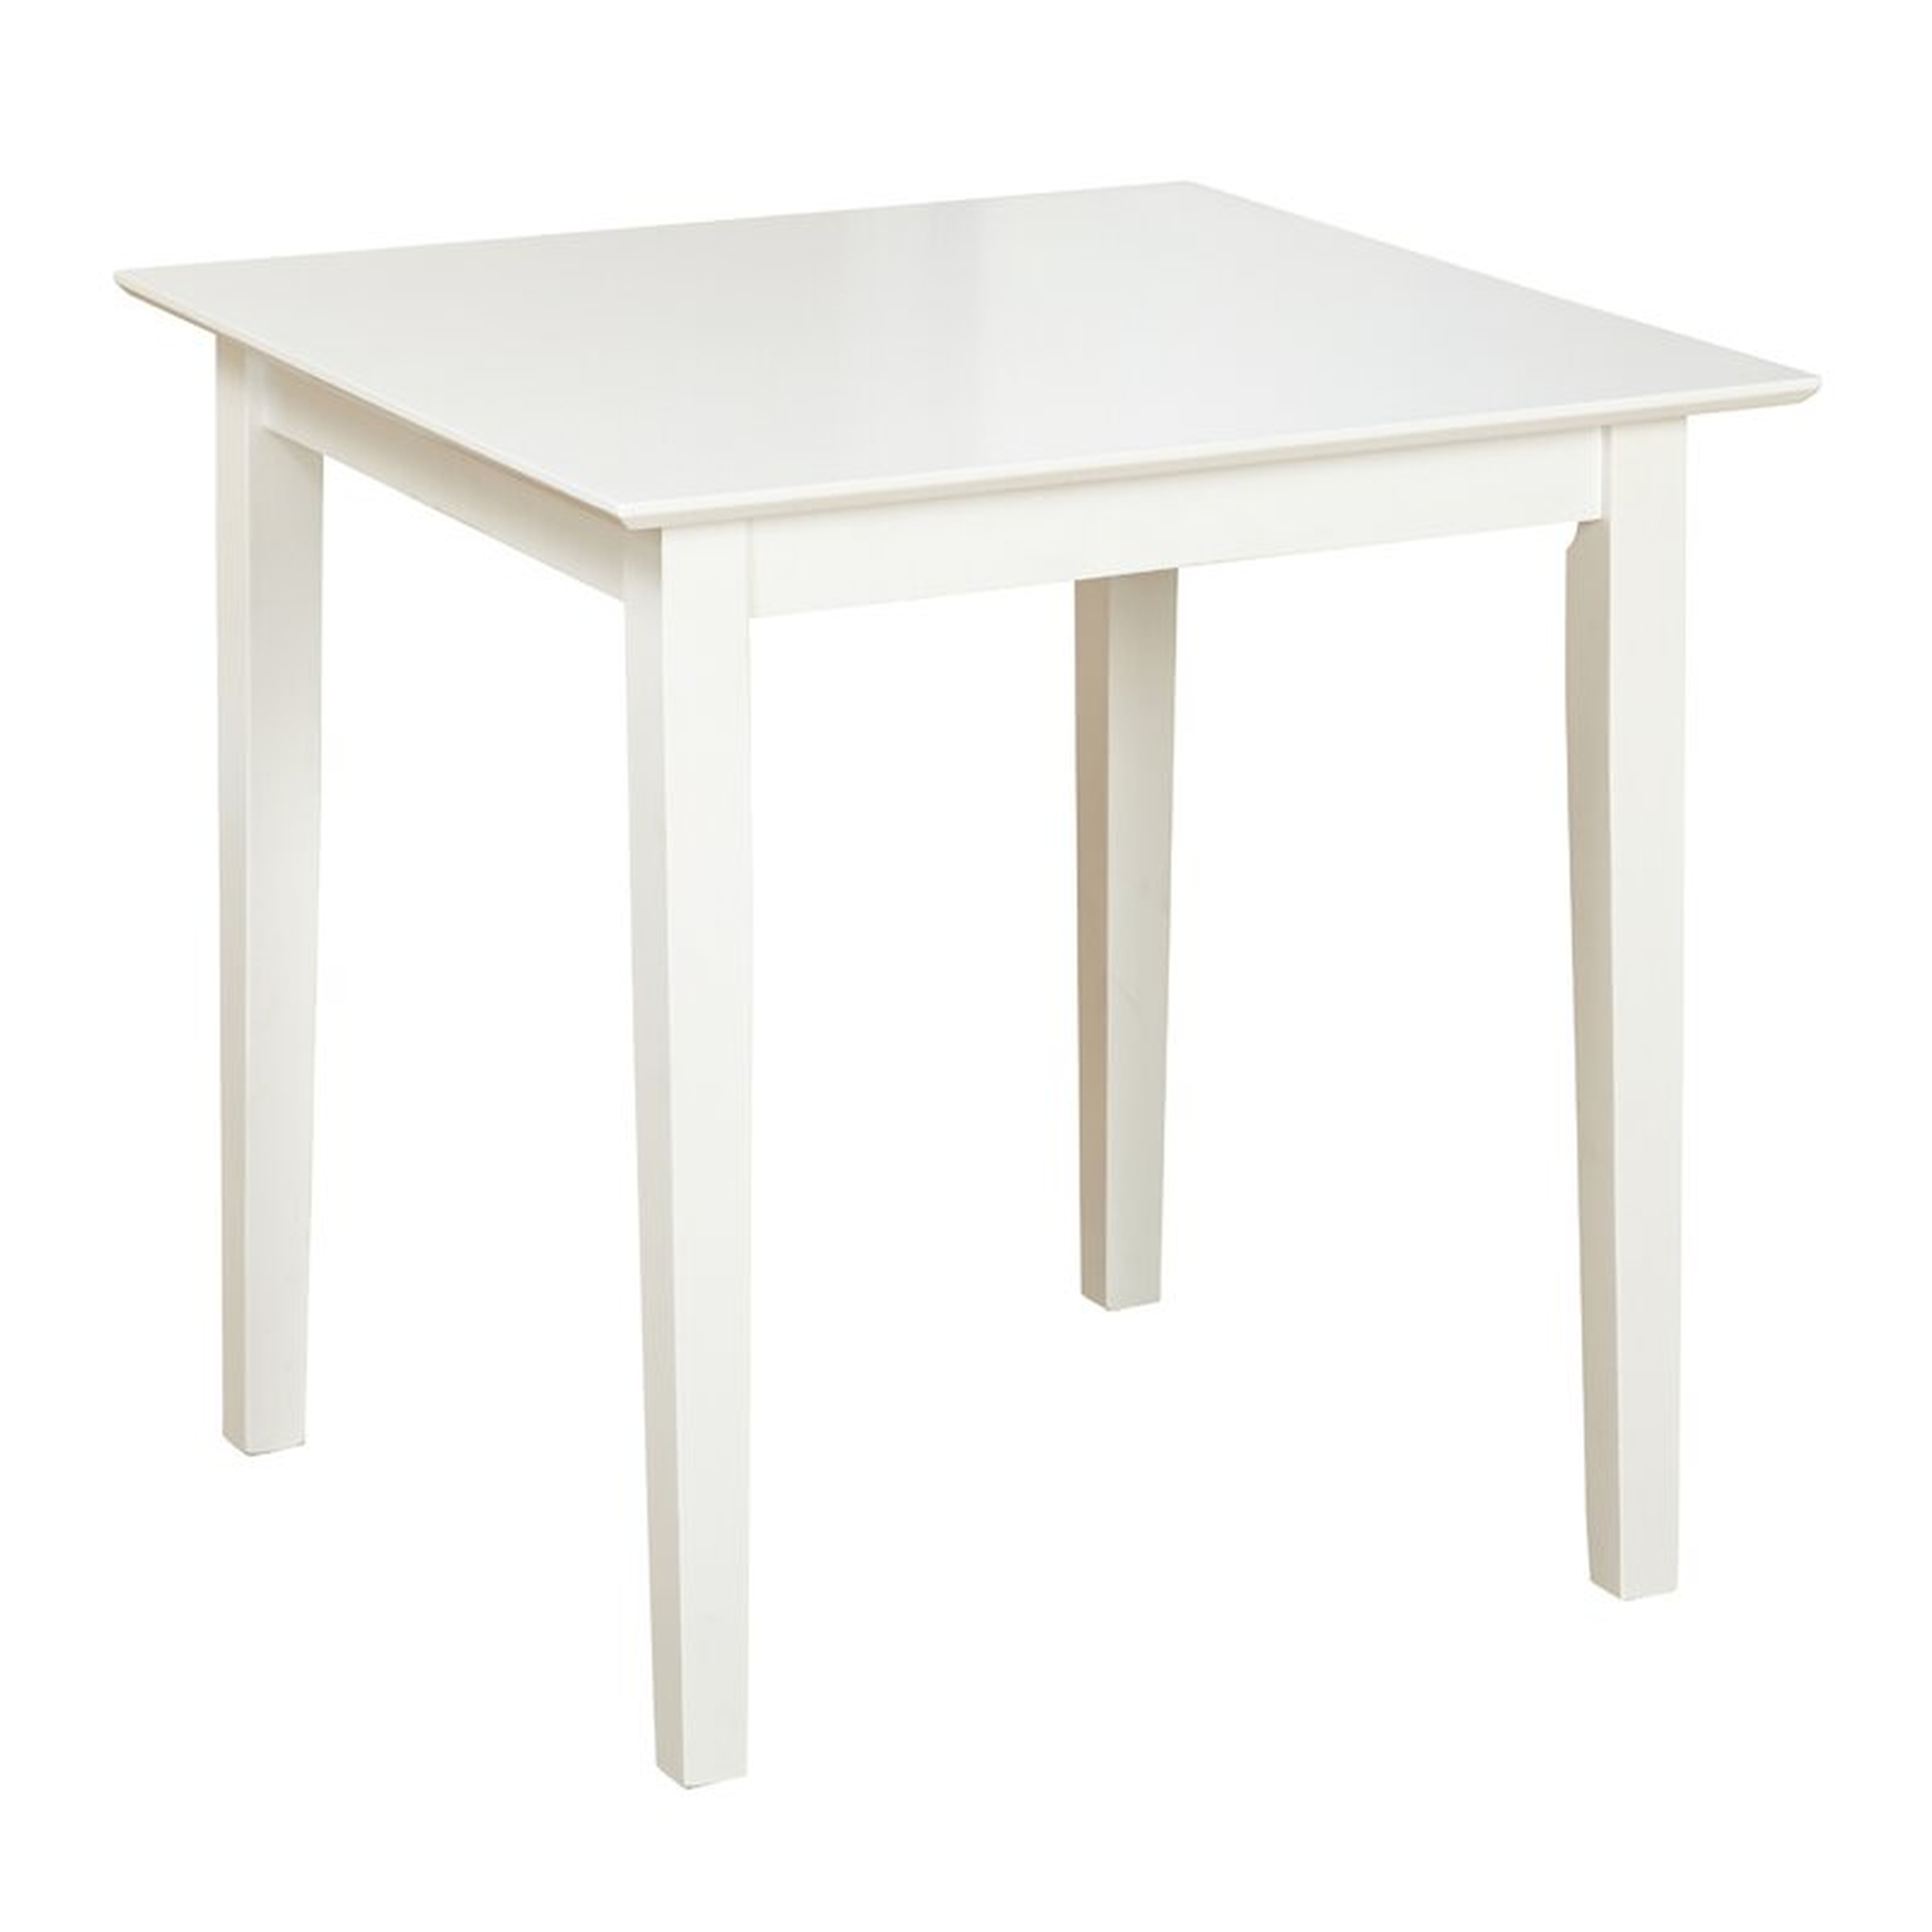 Whitworth Solid Wood Dining Table - Wayfair